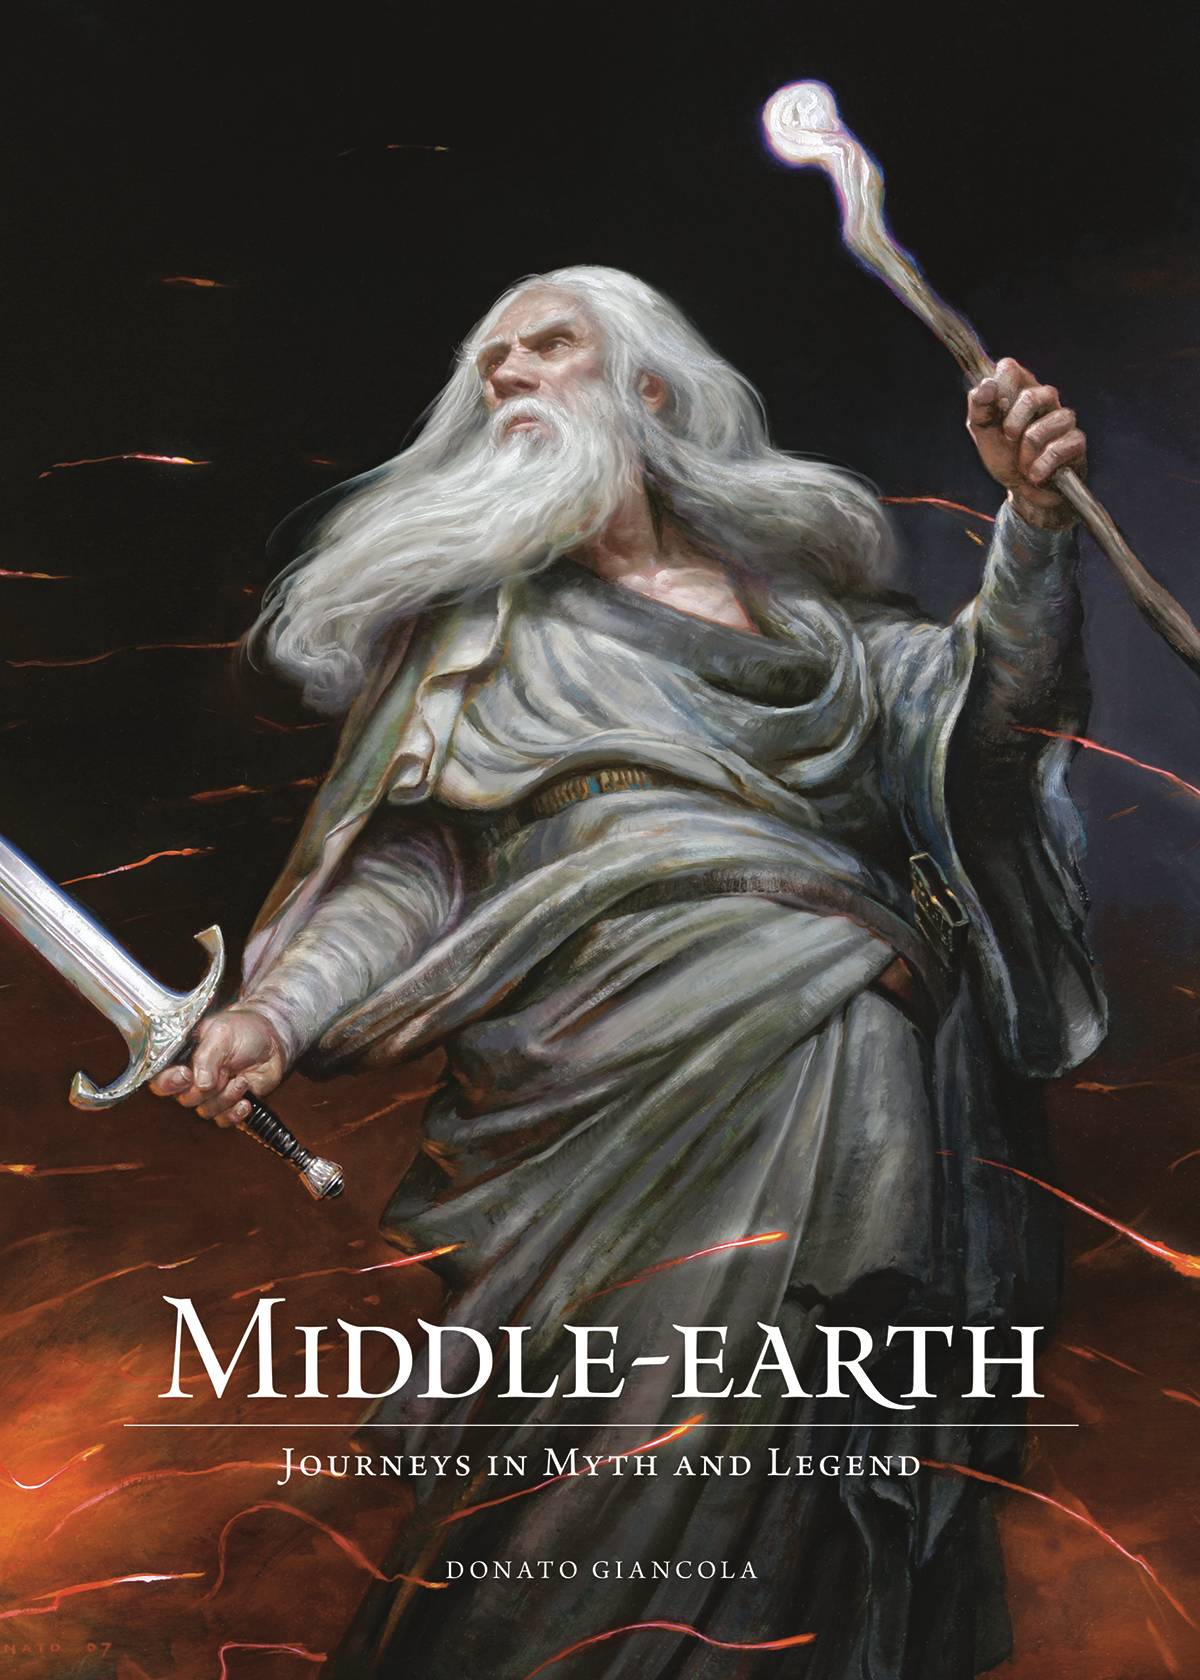 MIDDLE-EARTH HC JOURNEYS IN MYTH AND LEGEND (SEP180284)